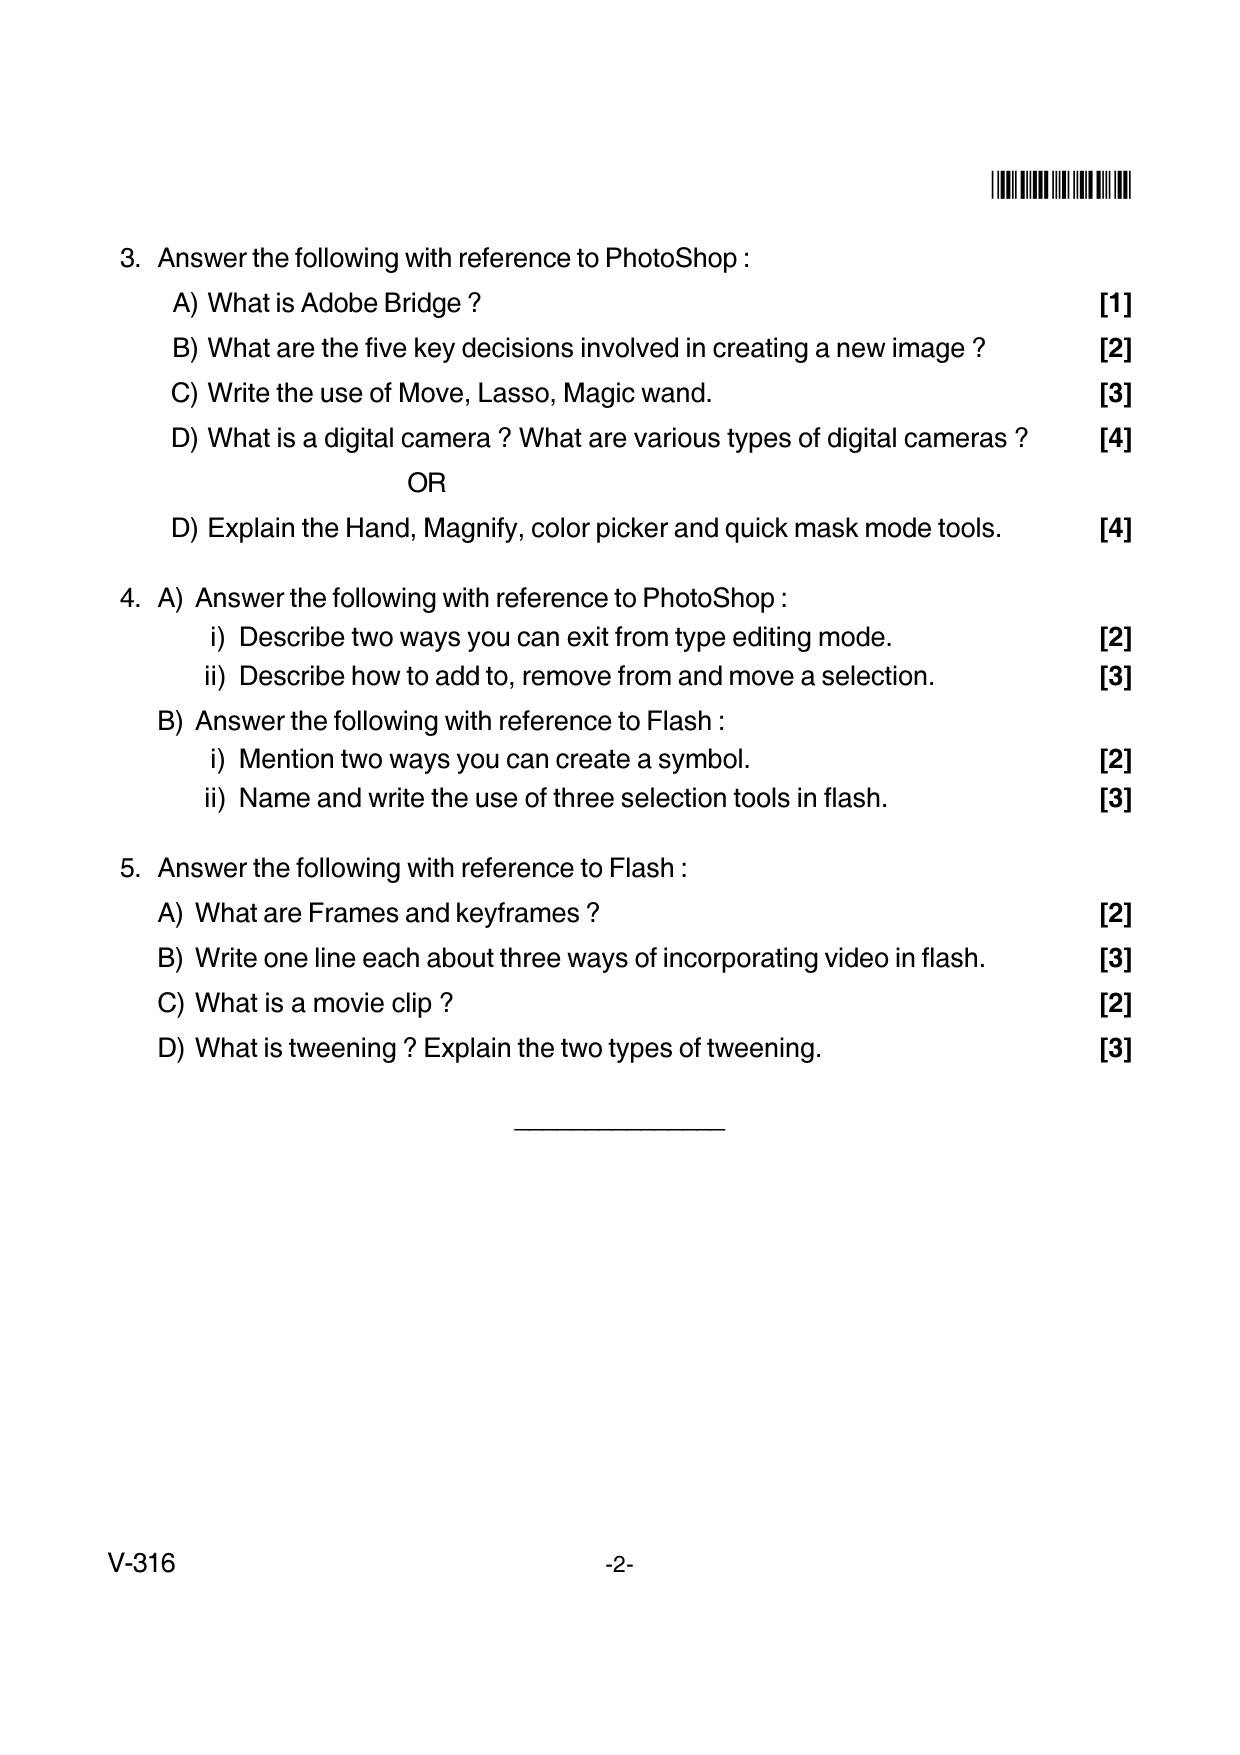 Goa Board Class 12 Computer Software Application  Voc 316 New Pattern (March 2018) Question Paper - Page 2